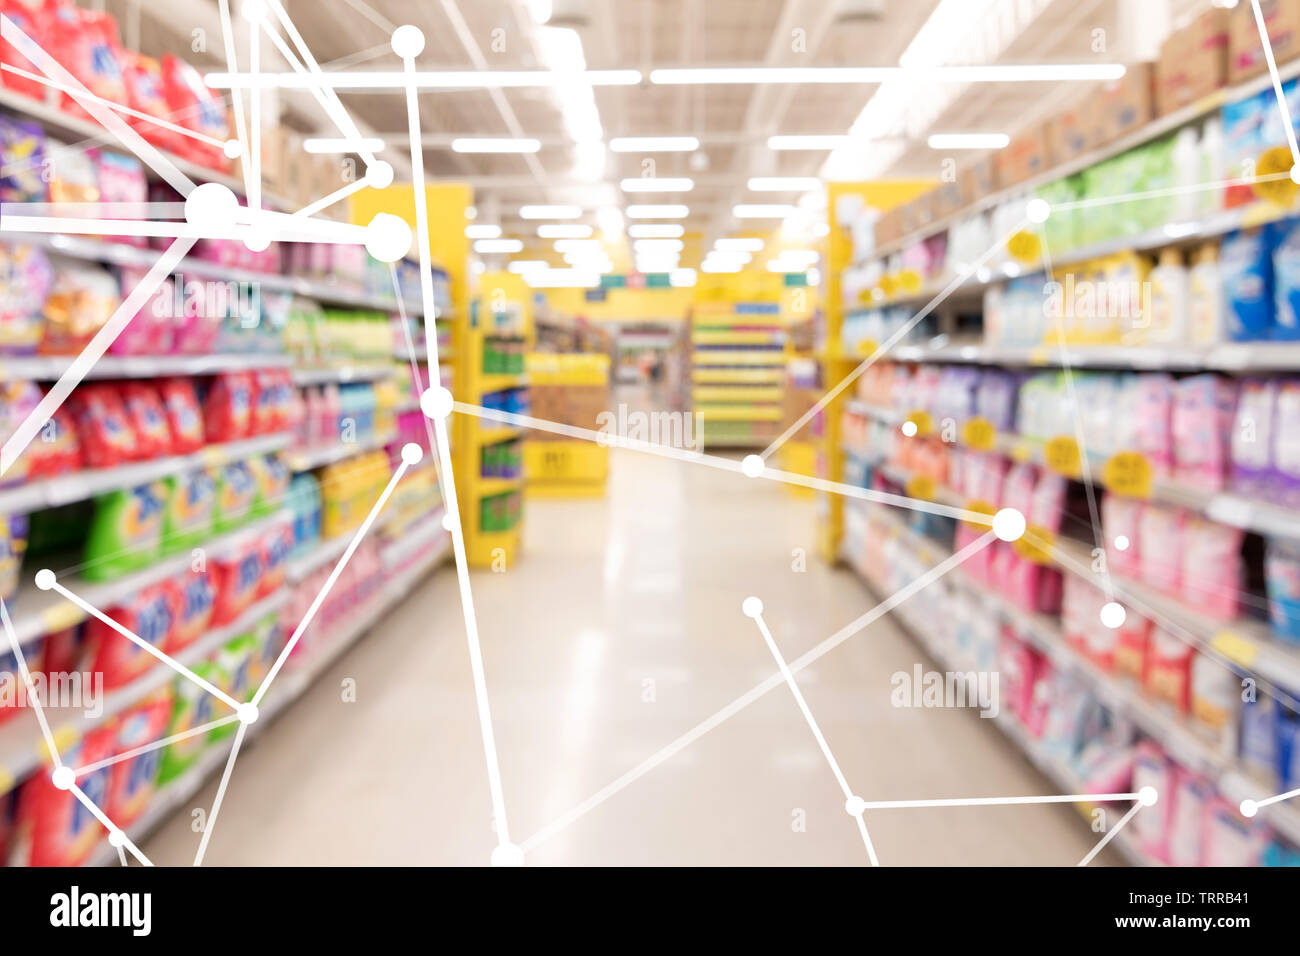 Smart retail , deep learning , neural networks technology and marketing concept. Disruption artificial intelligence atoms connect with retail shop sup Stock Photo